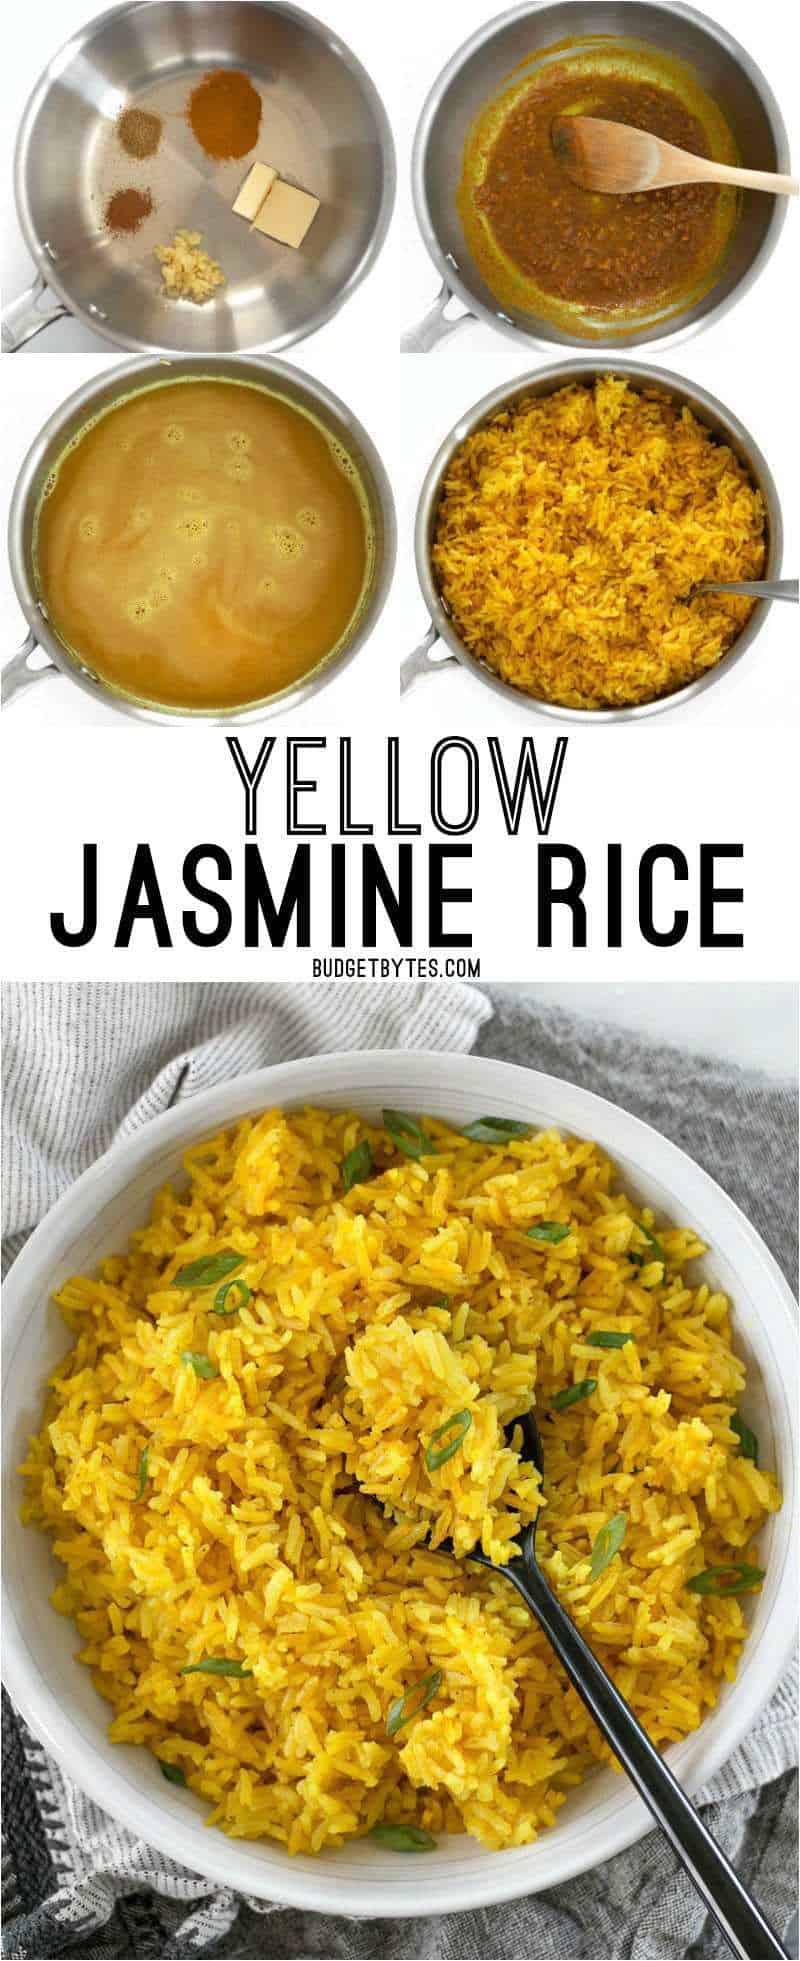 This savory Yellow Jasmine Rice combines warm and fragrant Indian spices and chicken broth to make the most flavorful rice you've ever tasted! BudgetBytes.com